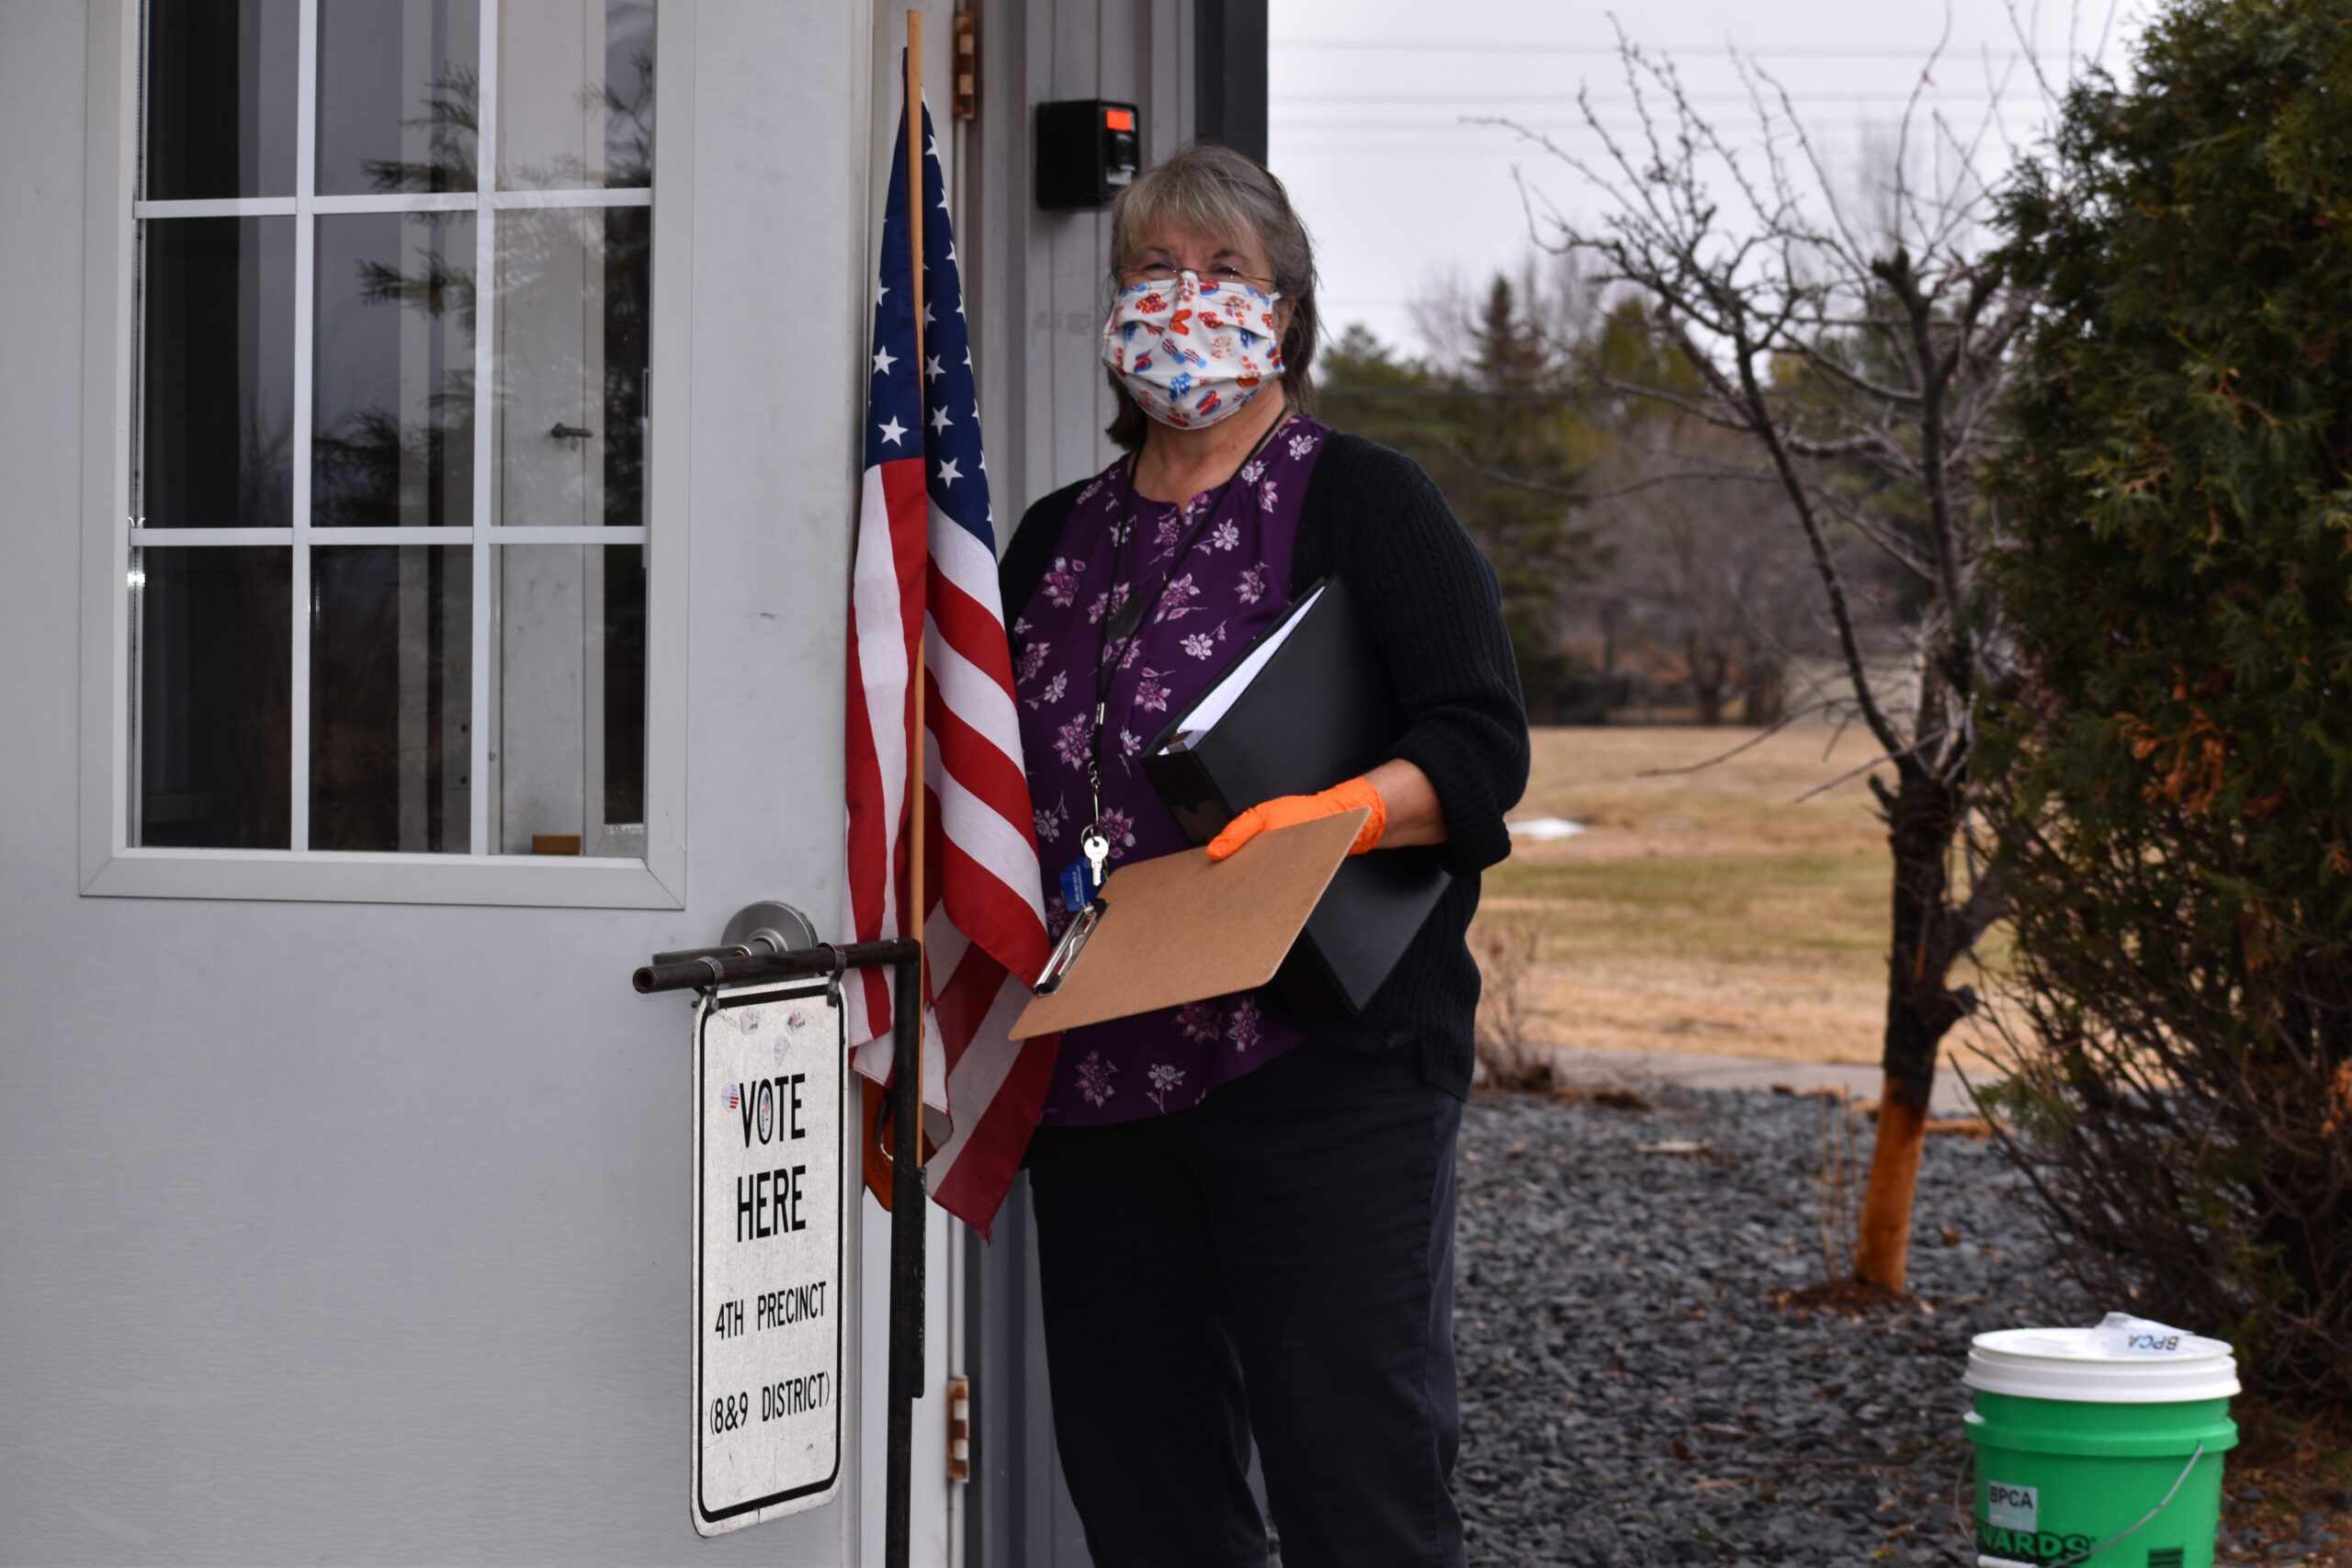 Kathy Izzard, donning a mask and gloves, has been helping people vote